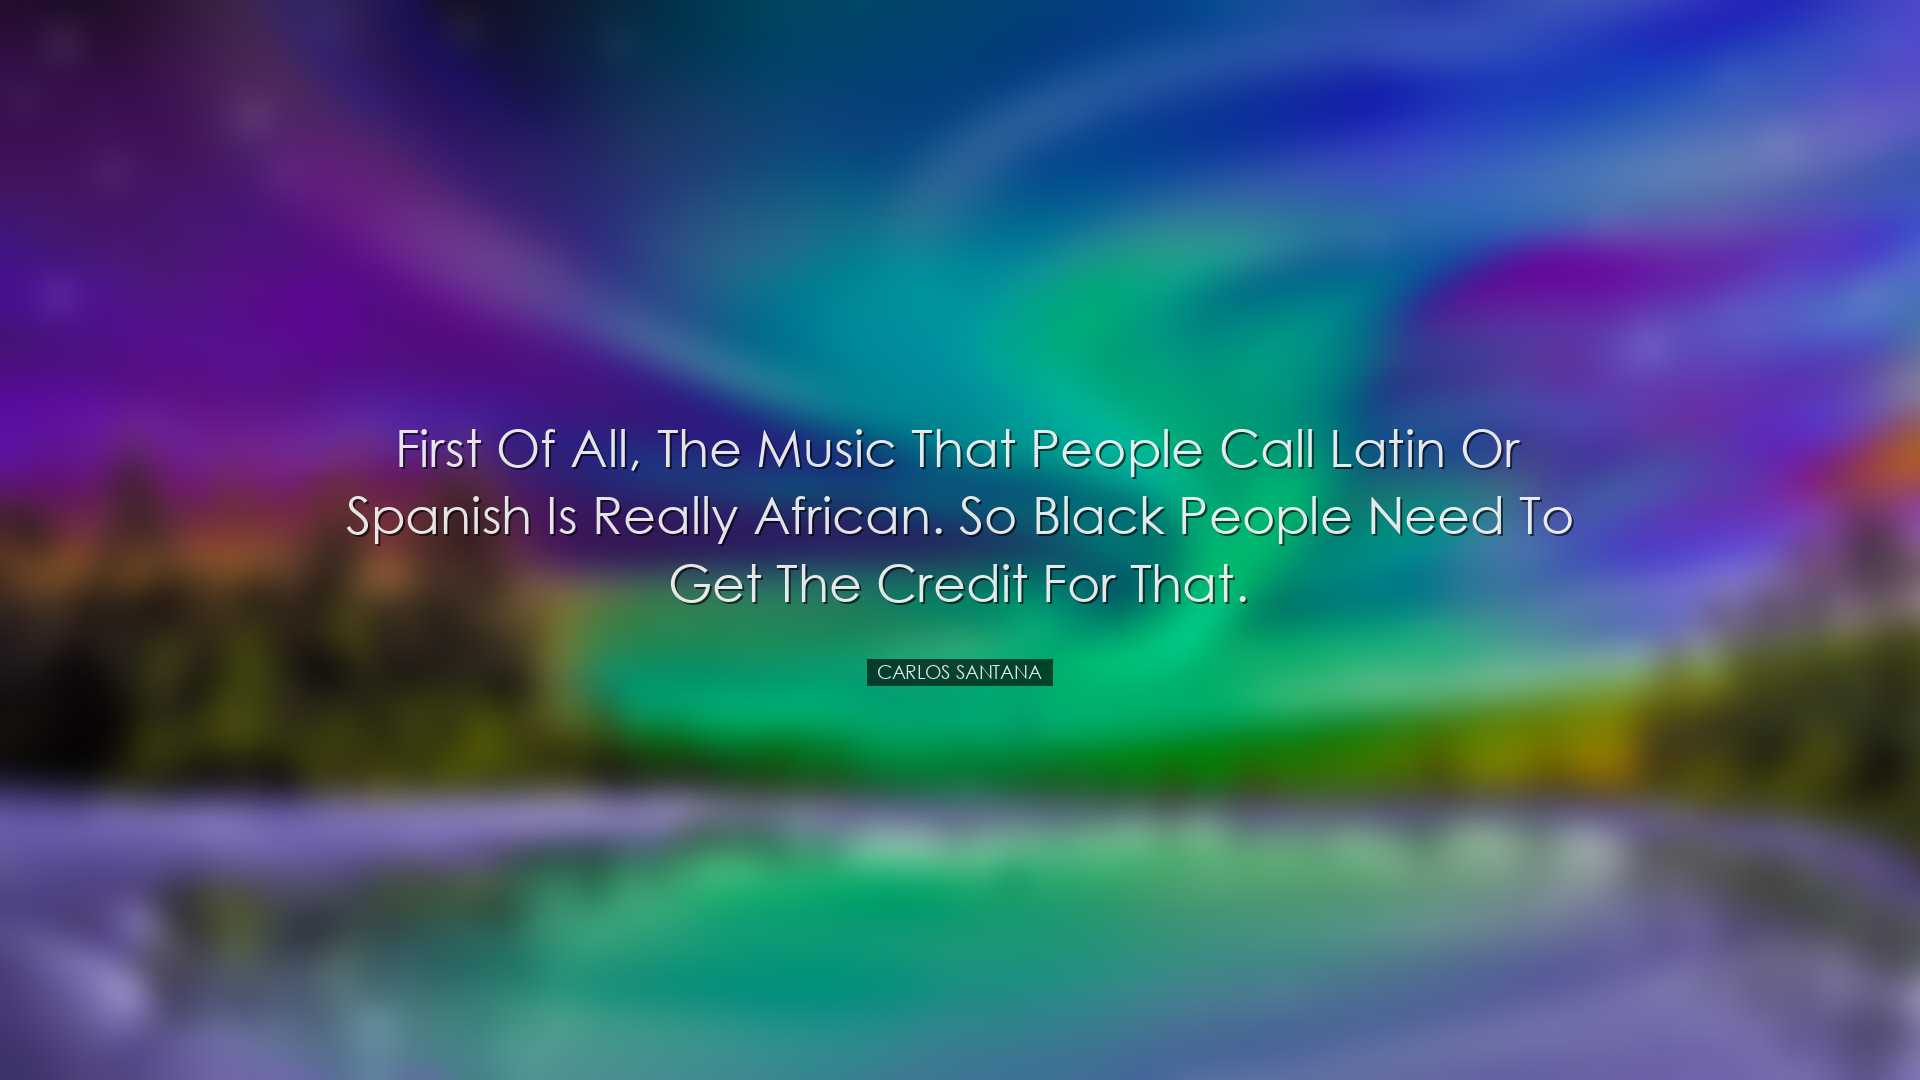 First of all, the music that people call Latin or Spanish is reall